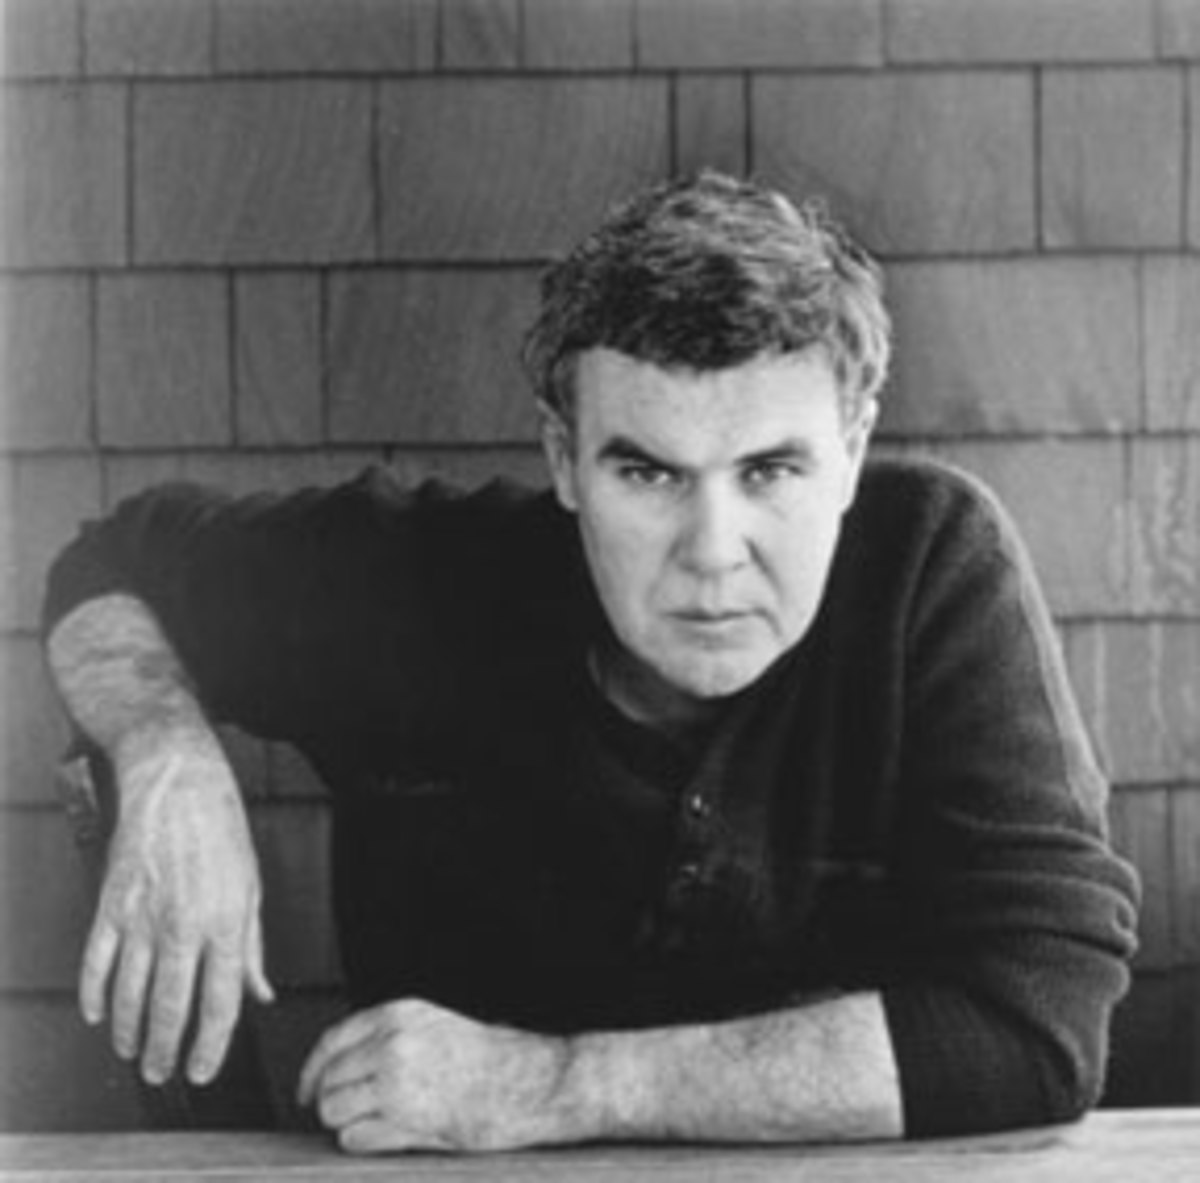 A close look at Cathedral by Raymond Carver